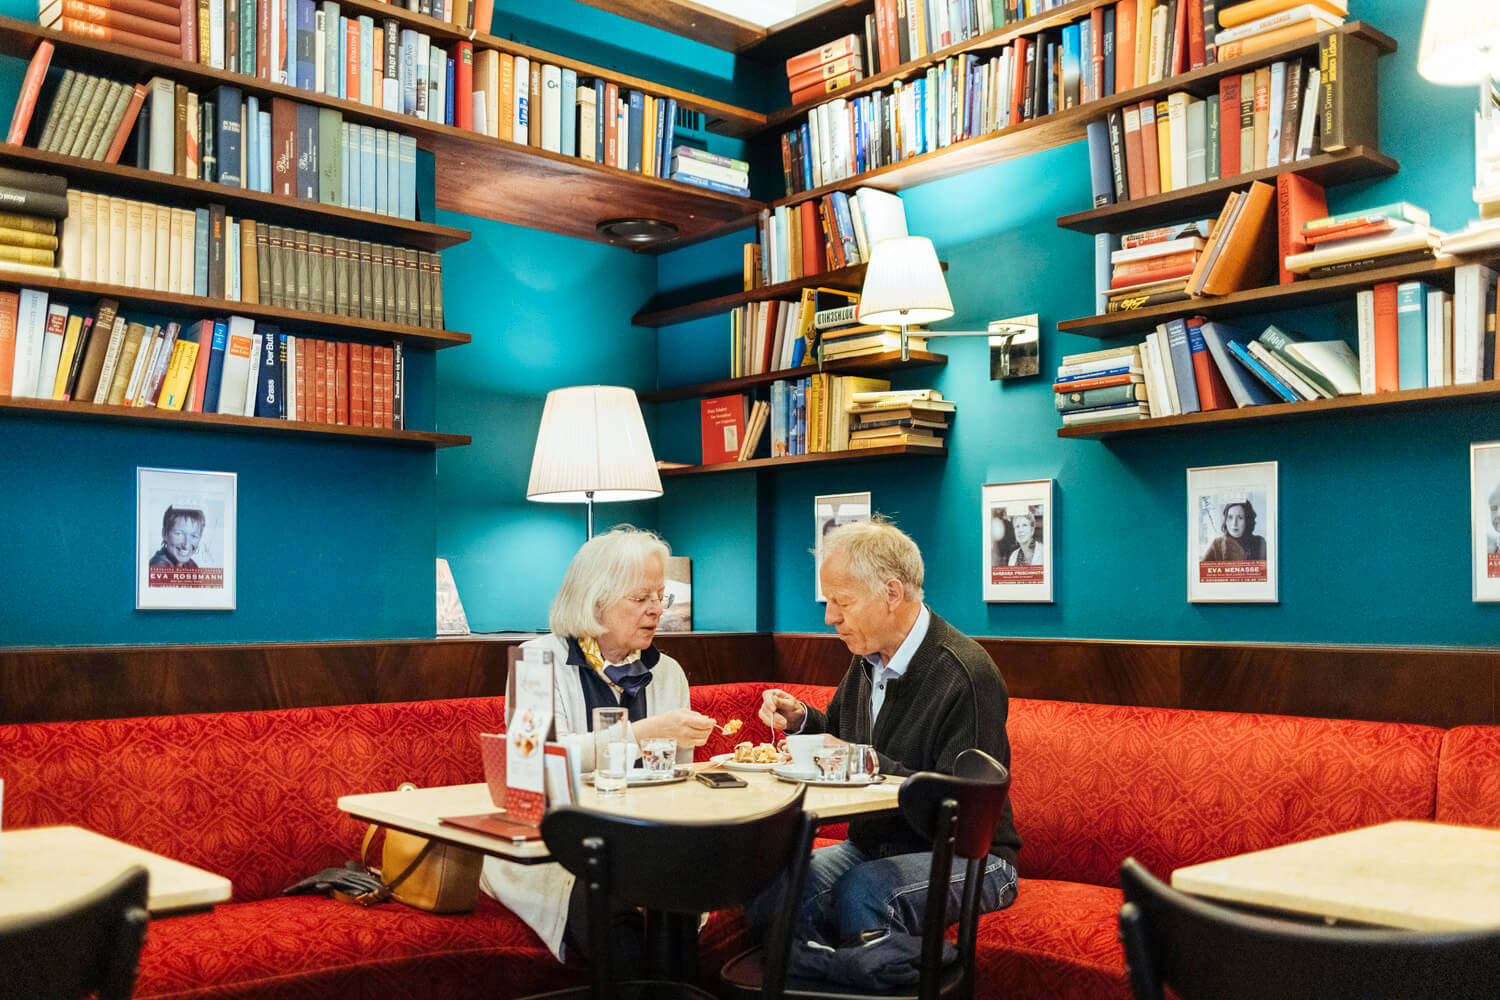 An elderly couple enjoys a meal together in a cosy café corner lined with bookshelves filled with colourful books. The vibrant teal walls are decorated with framed portraits, and the warm lighting complements the intimate ambiance.